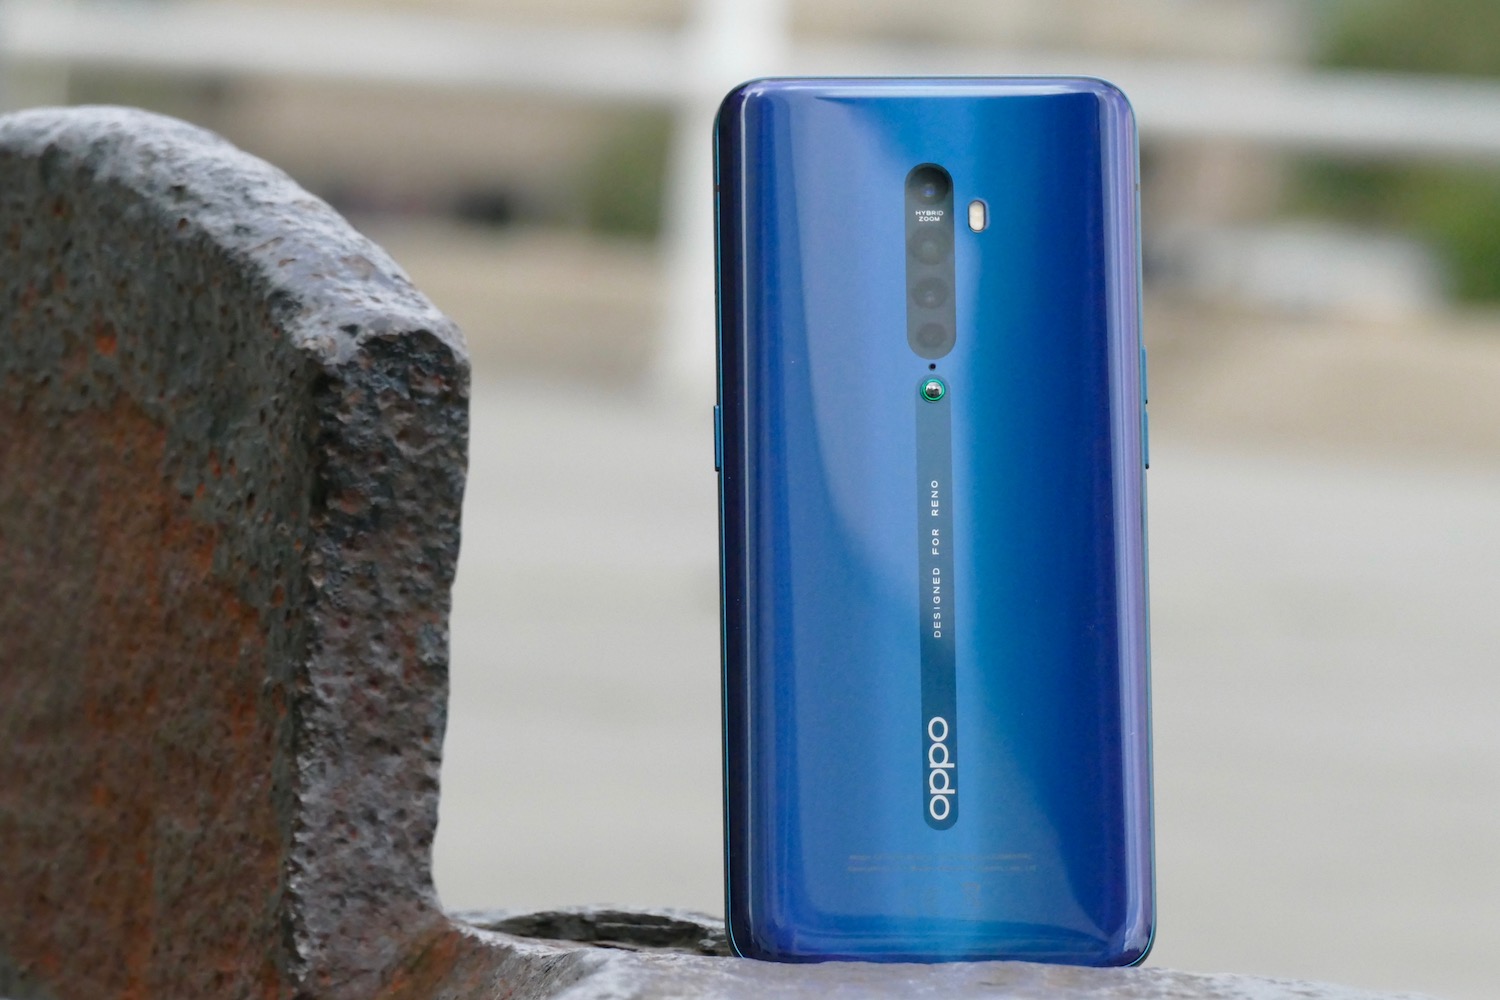 The Oppo Reno 2's Camera Takes Photos Like No Other at This Price